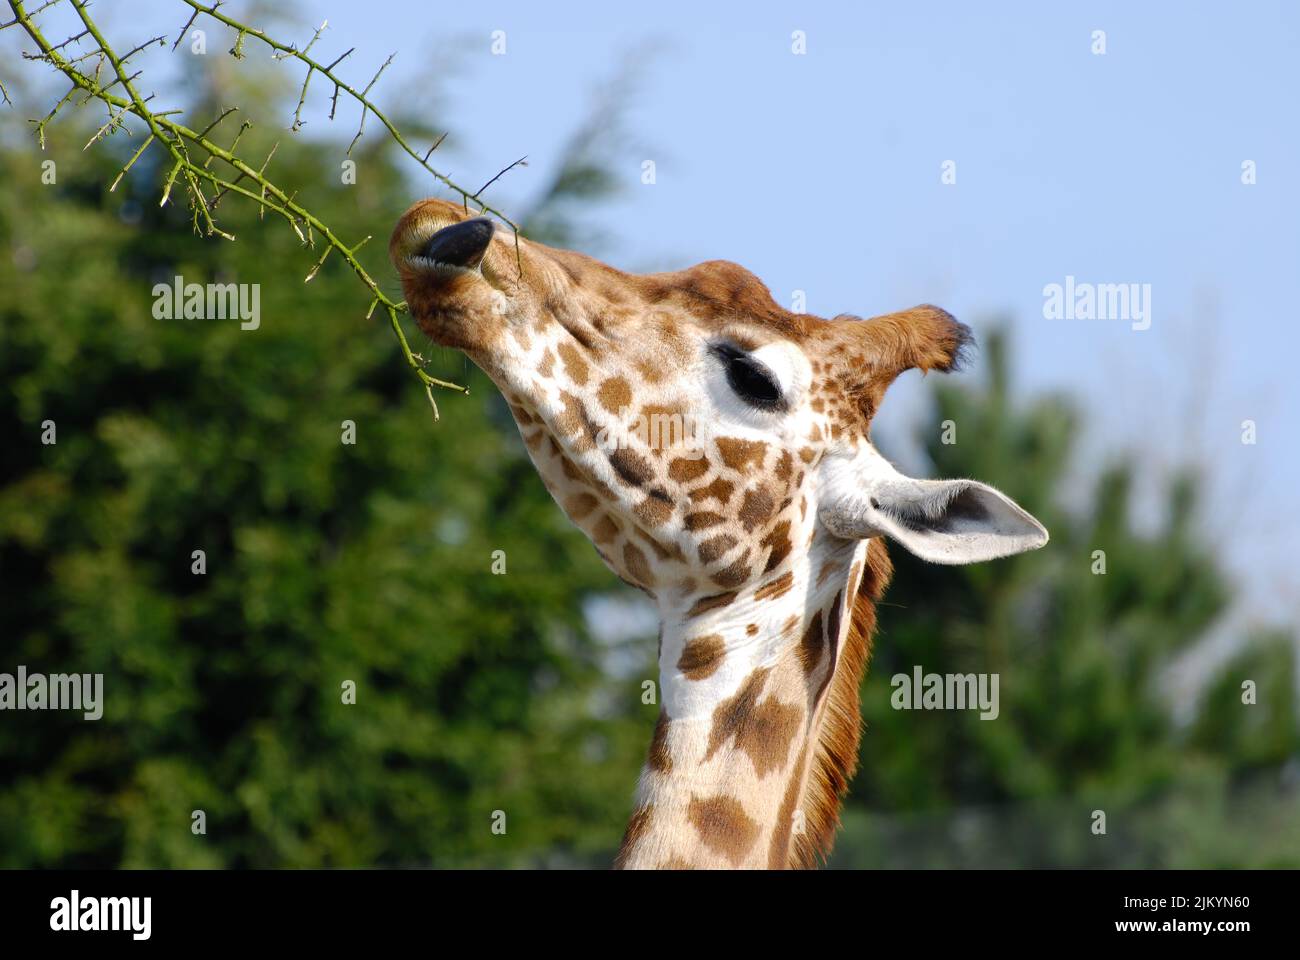 A beautiful Giraffe nibbling at spiky branches on a sunny day Stock Photo